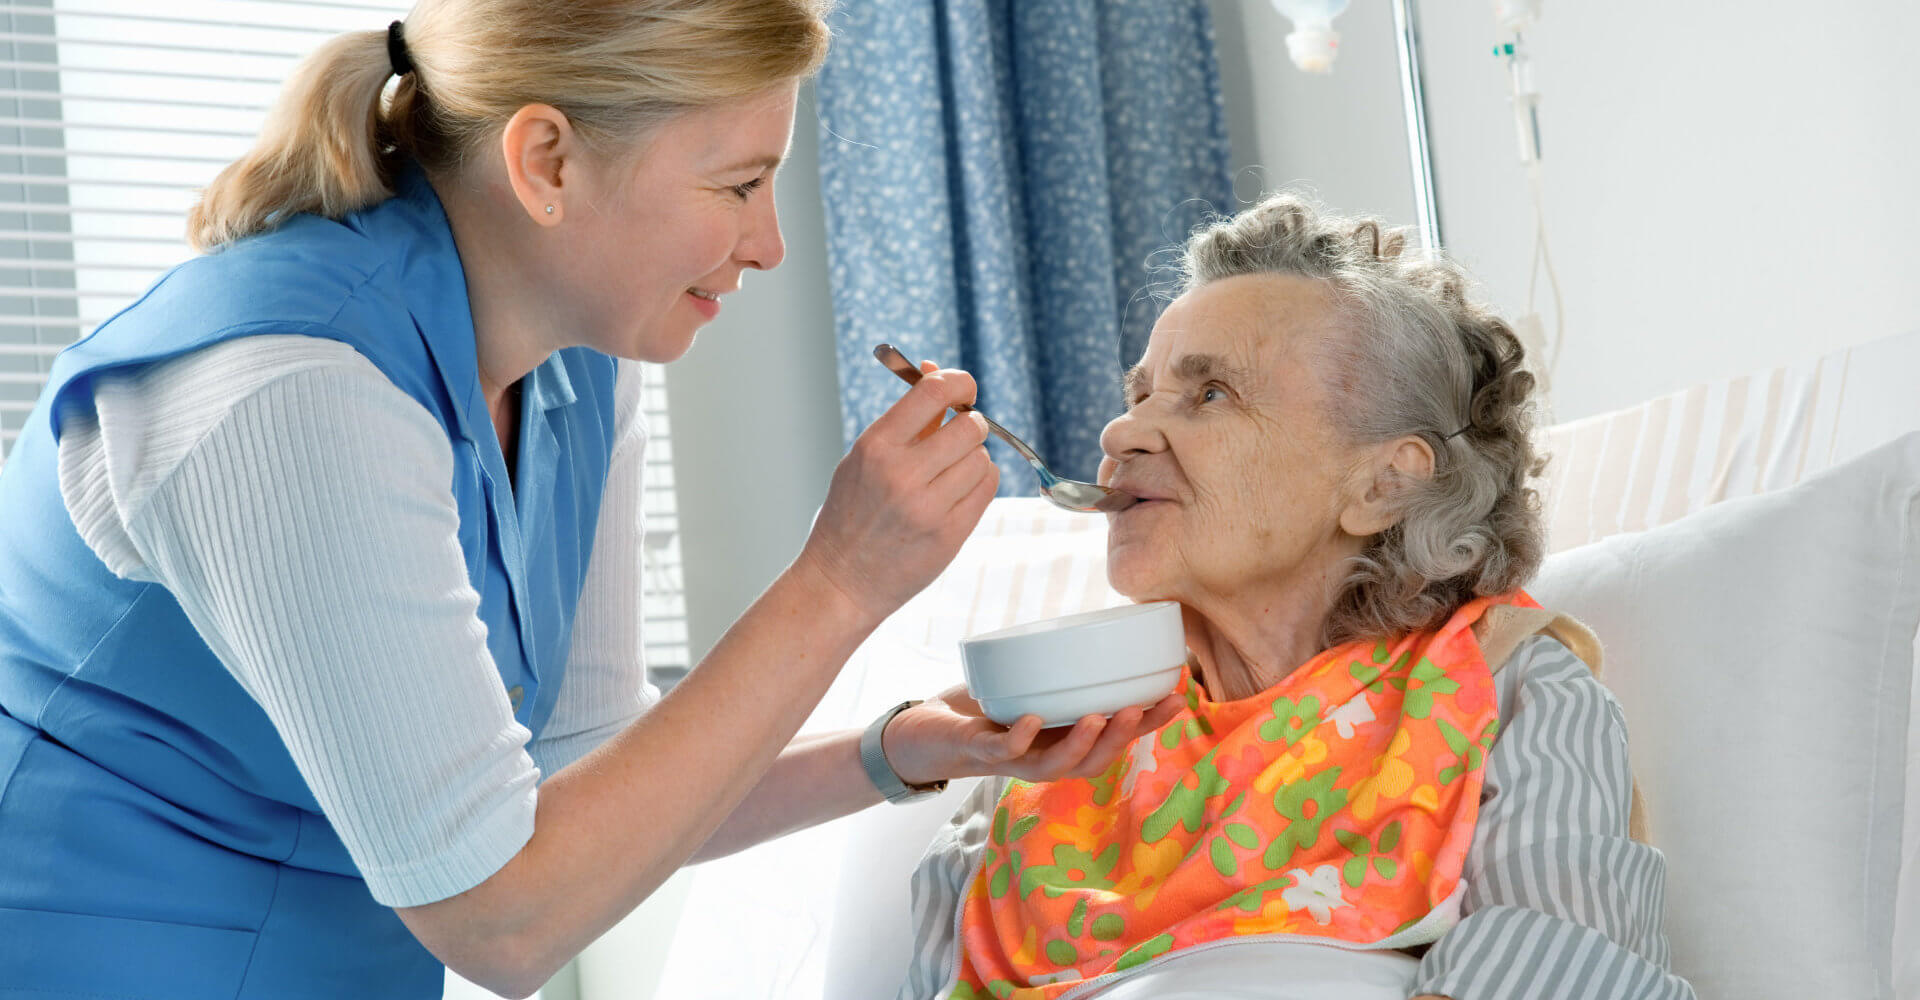 nurse helping an old lady with her meal